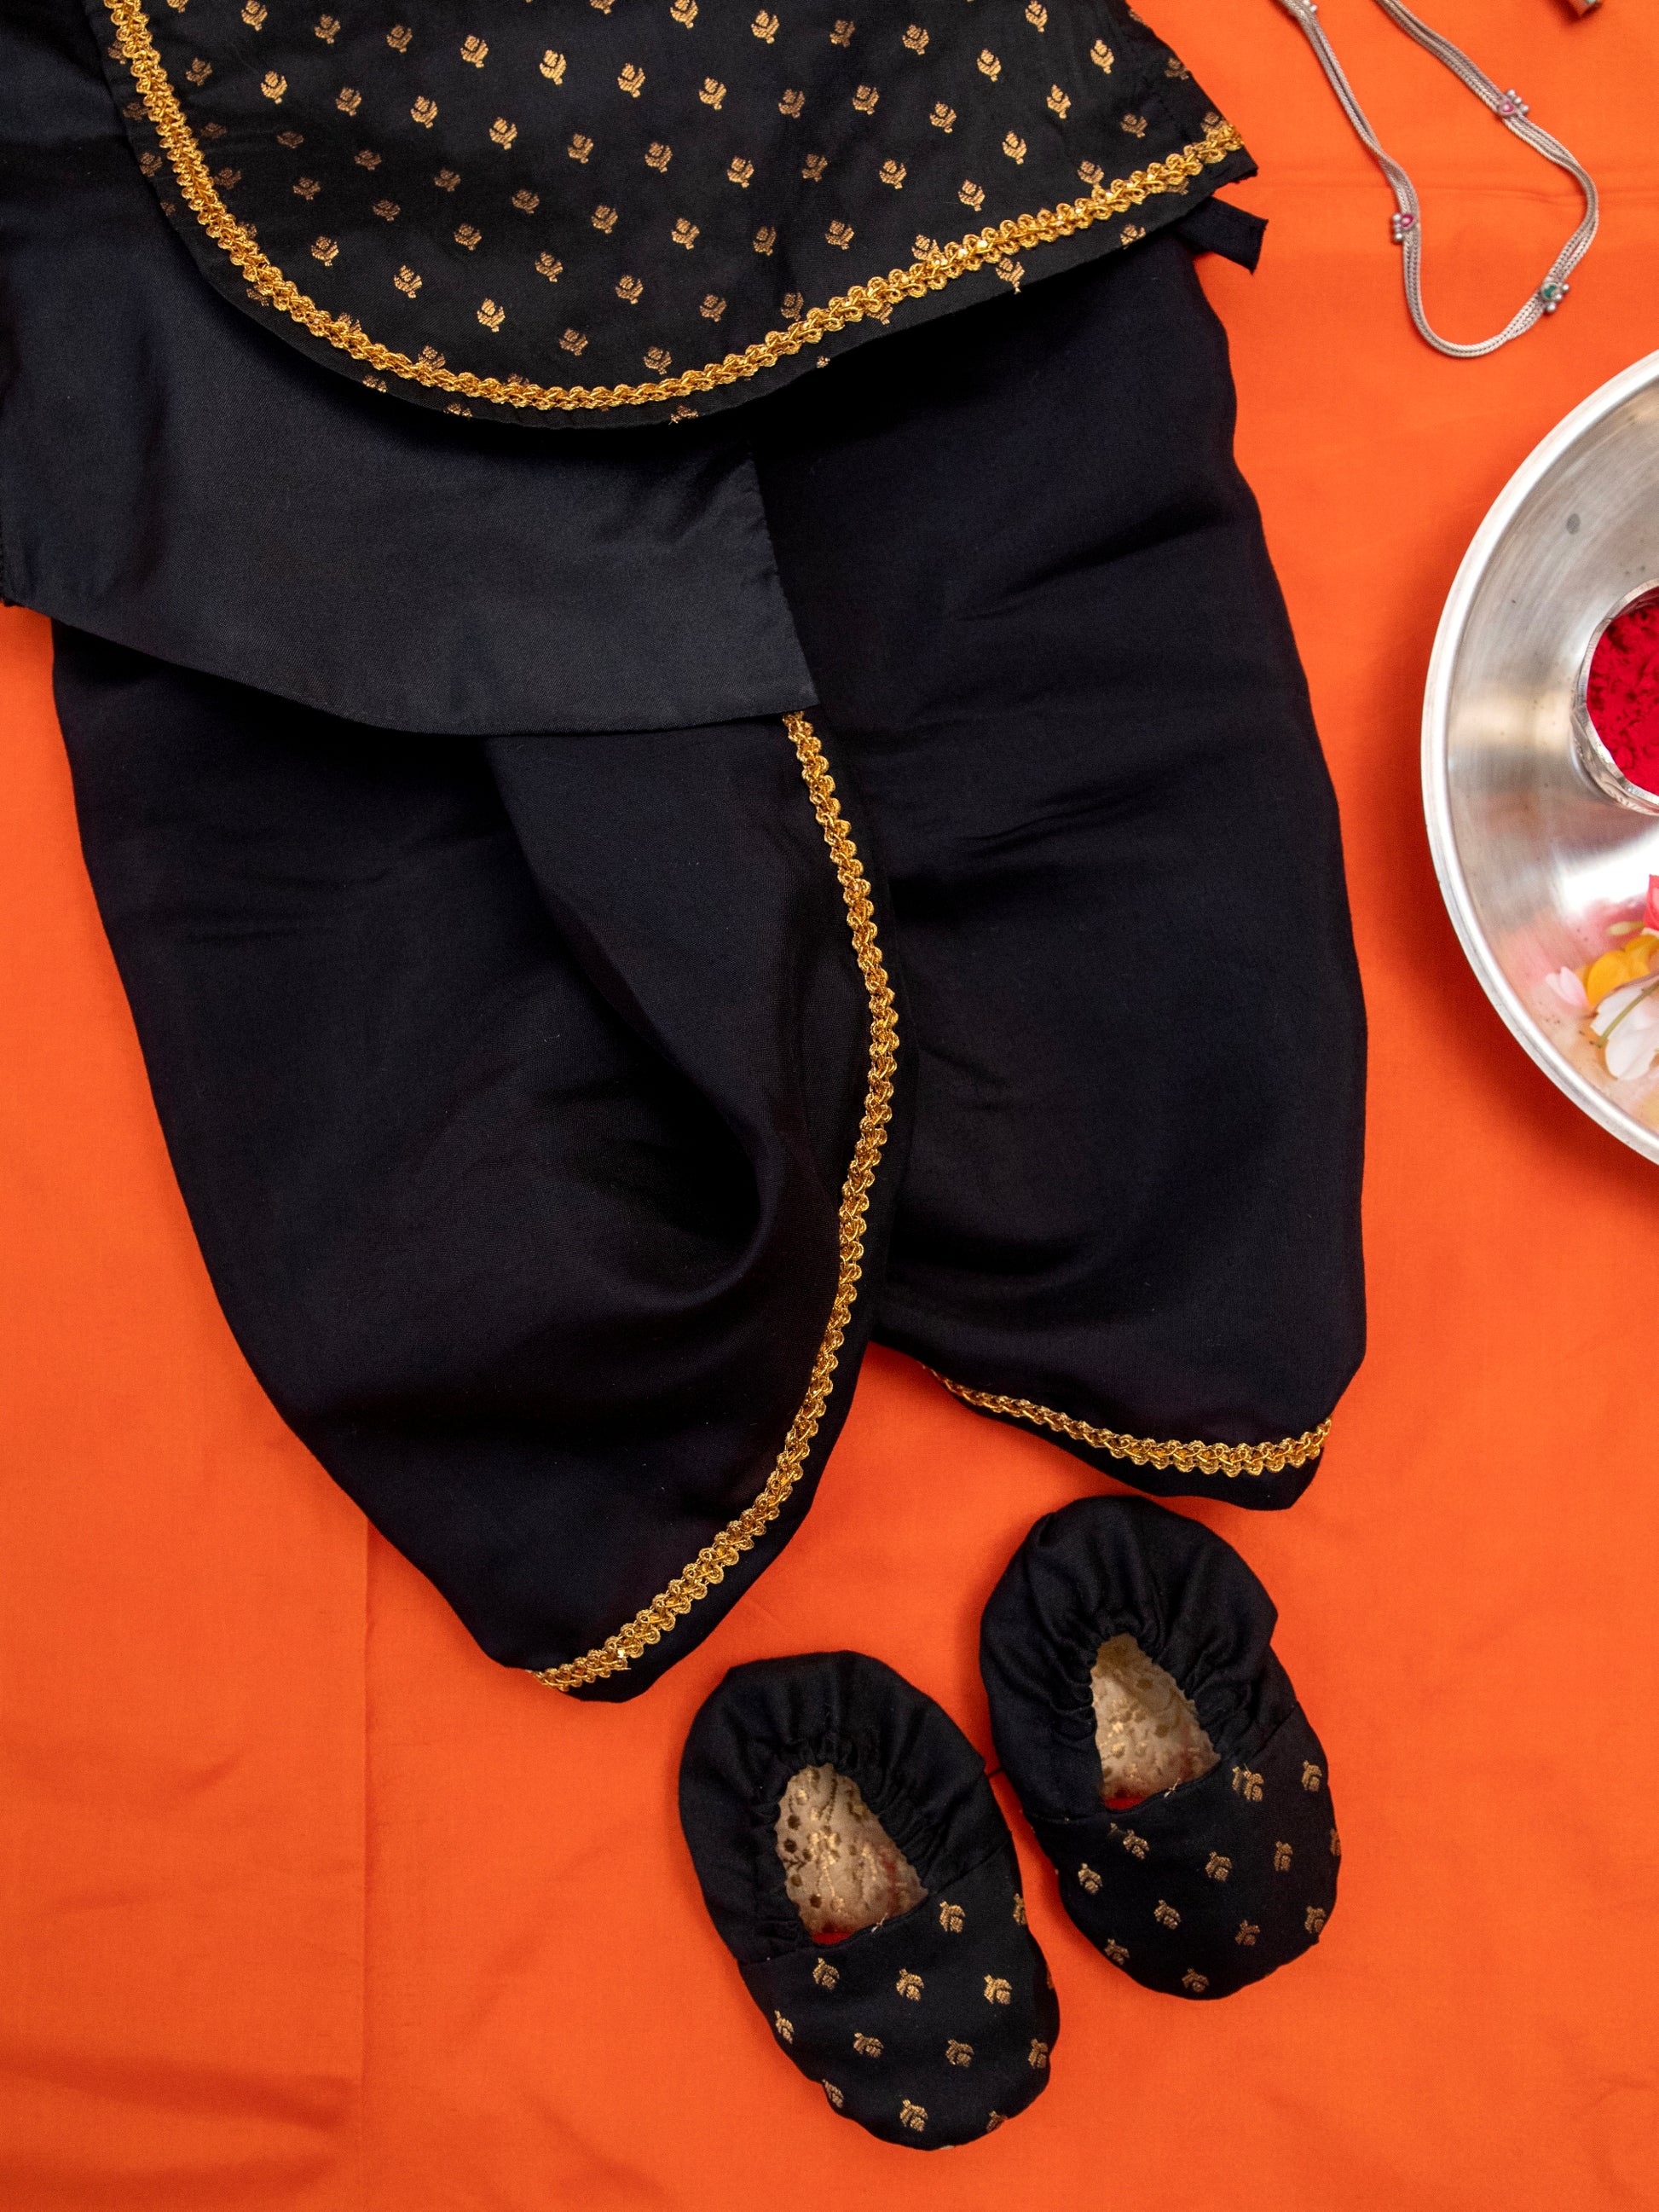 Black Brocade Dhoti Kurta Set for a newborn baby boy,includes black cotton silk dhoti,matching bonnet & booties.It's the perfect outfit for your baby's naming ceremony,naamkaran,annaprashan ceremony.Traditional dress for Noolukettu Ceremony,Pachavi Puja,cradle ceremony,Rice Ceremony,Chatti Puja etc. Apt gifting idea